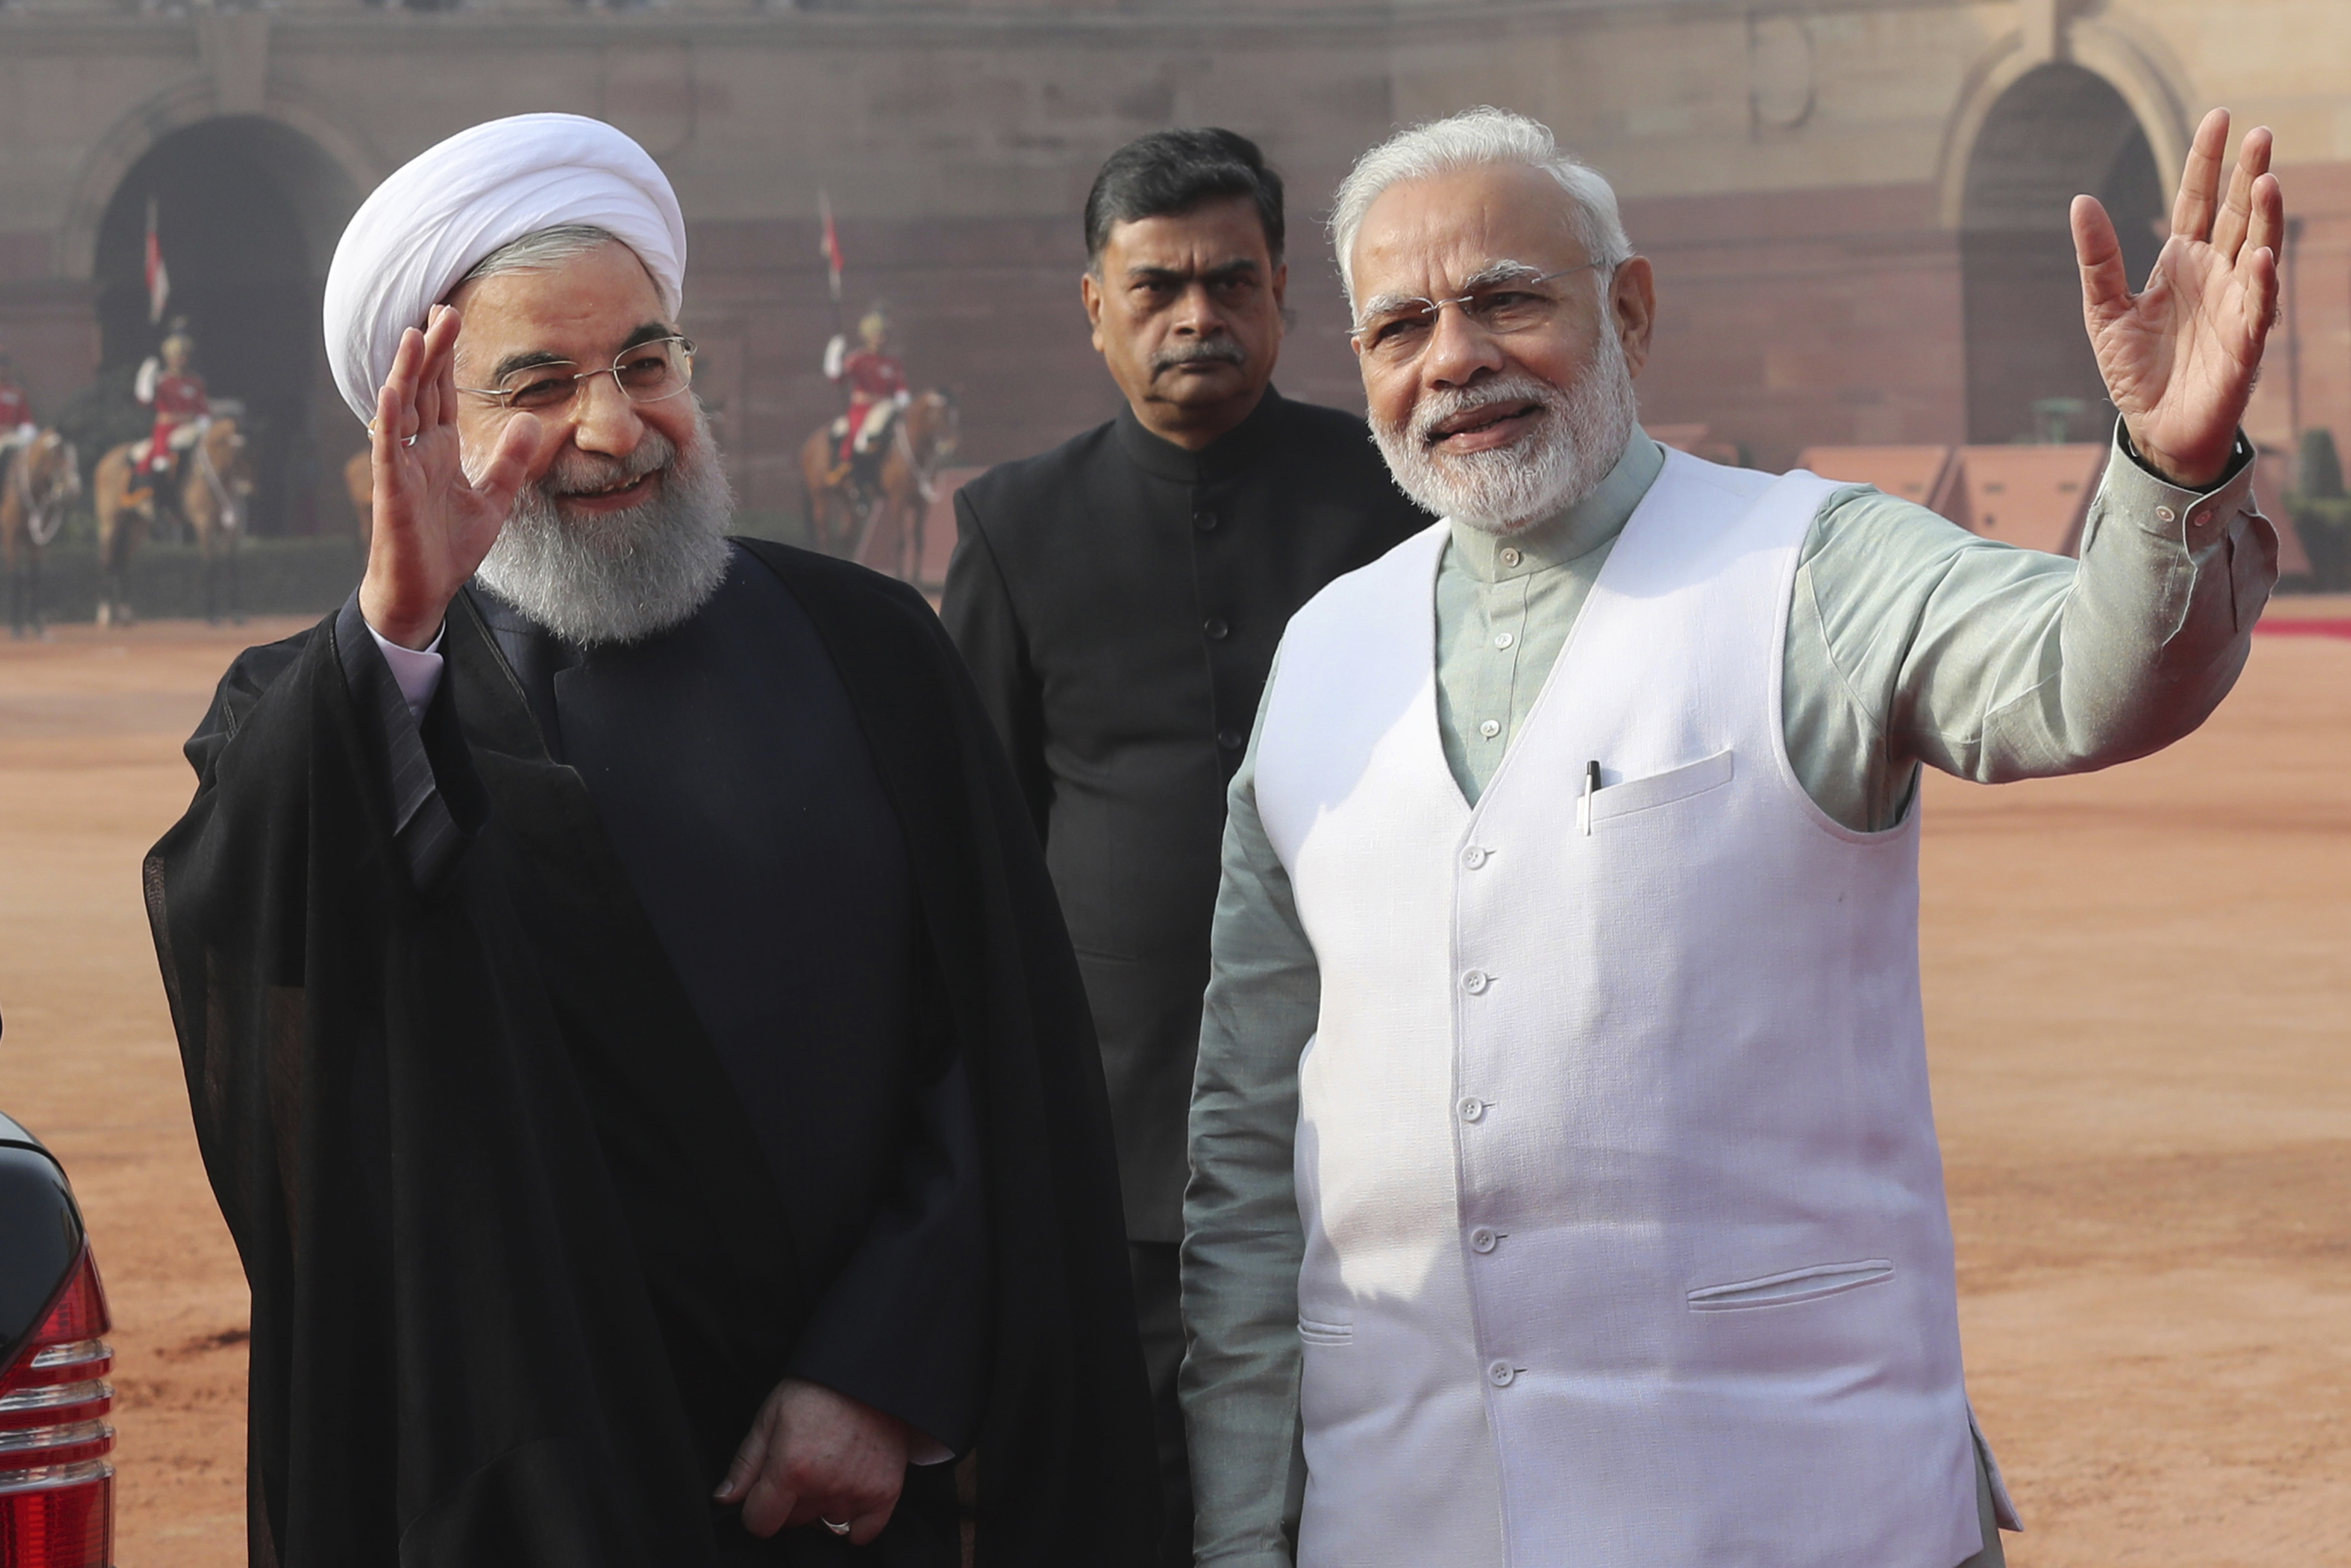 Indian Prime Minister Narendra Modi, right, and Iranian President Hassan Rouhani, left, wave to media as later's leaves after a ceremonial reception from the Indian presidential palace, in New Delhi, India, Saturday, Feb. 17, 2018. Rouhani, who is on three days state visit to India has strongly criticized the Trump administration's recognition of Jerusalem as Israel's capital and urged Muslims to support the Palestinian cause. (AP Photo/Manish Swarup)